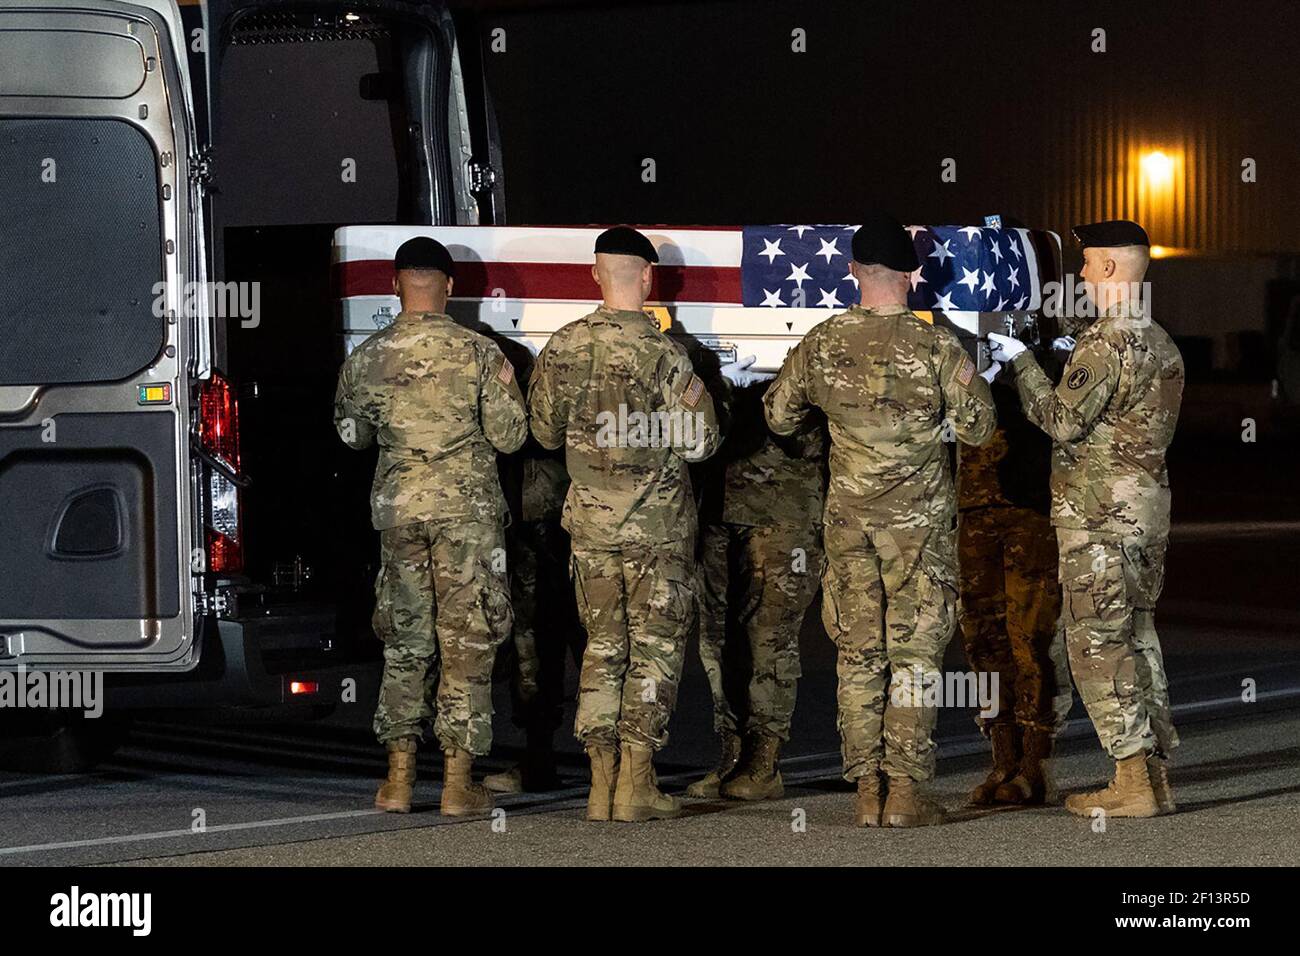 U.S. Army military honor guard members are seen during the dignified transfer ceremony Thursday evening Nov. 21 2019 at Dover Air Force Base in Dover Del. for Chief Warrant Officer 2 David C. Knadle of Tarrant Texas and Chief Warrant Officer 2 Kirk T. Fuchigami Jr. of Keaau Hawaii who were killed Wednesday in a helicopter crash in Afghanistan. Stock Photo